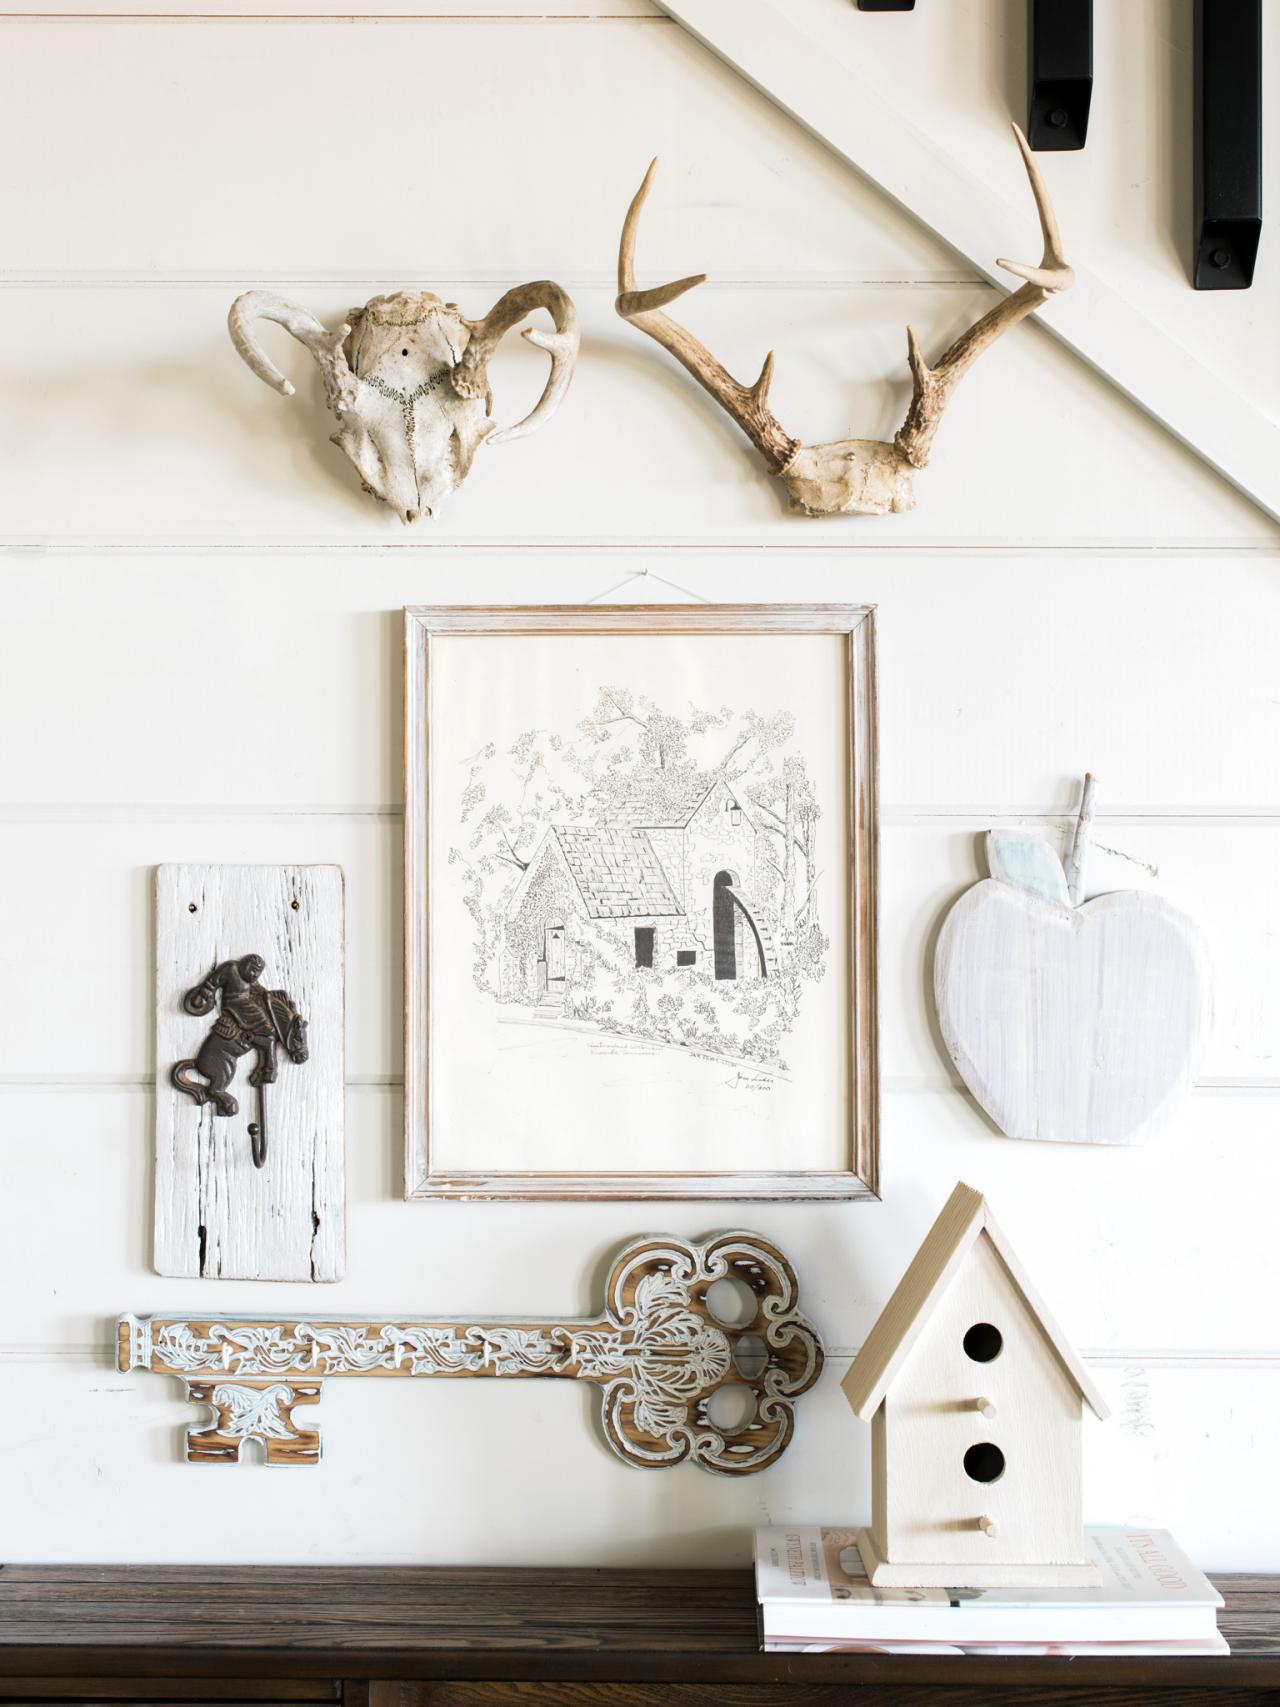 Easy Shiplap Walls Install Get The Look Without The Fuss DIY